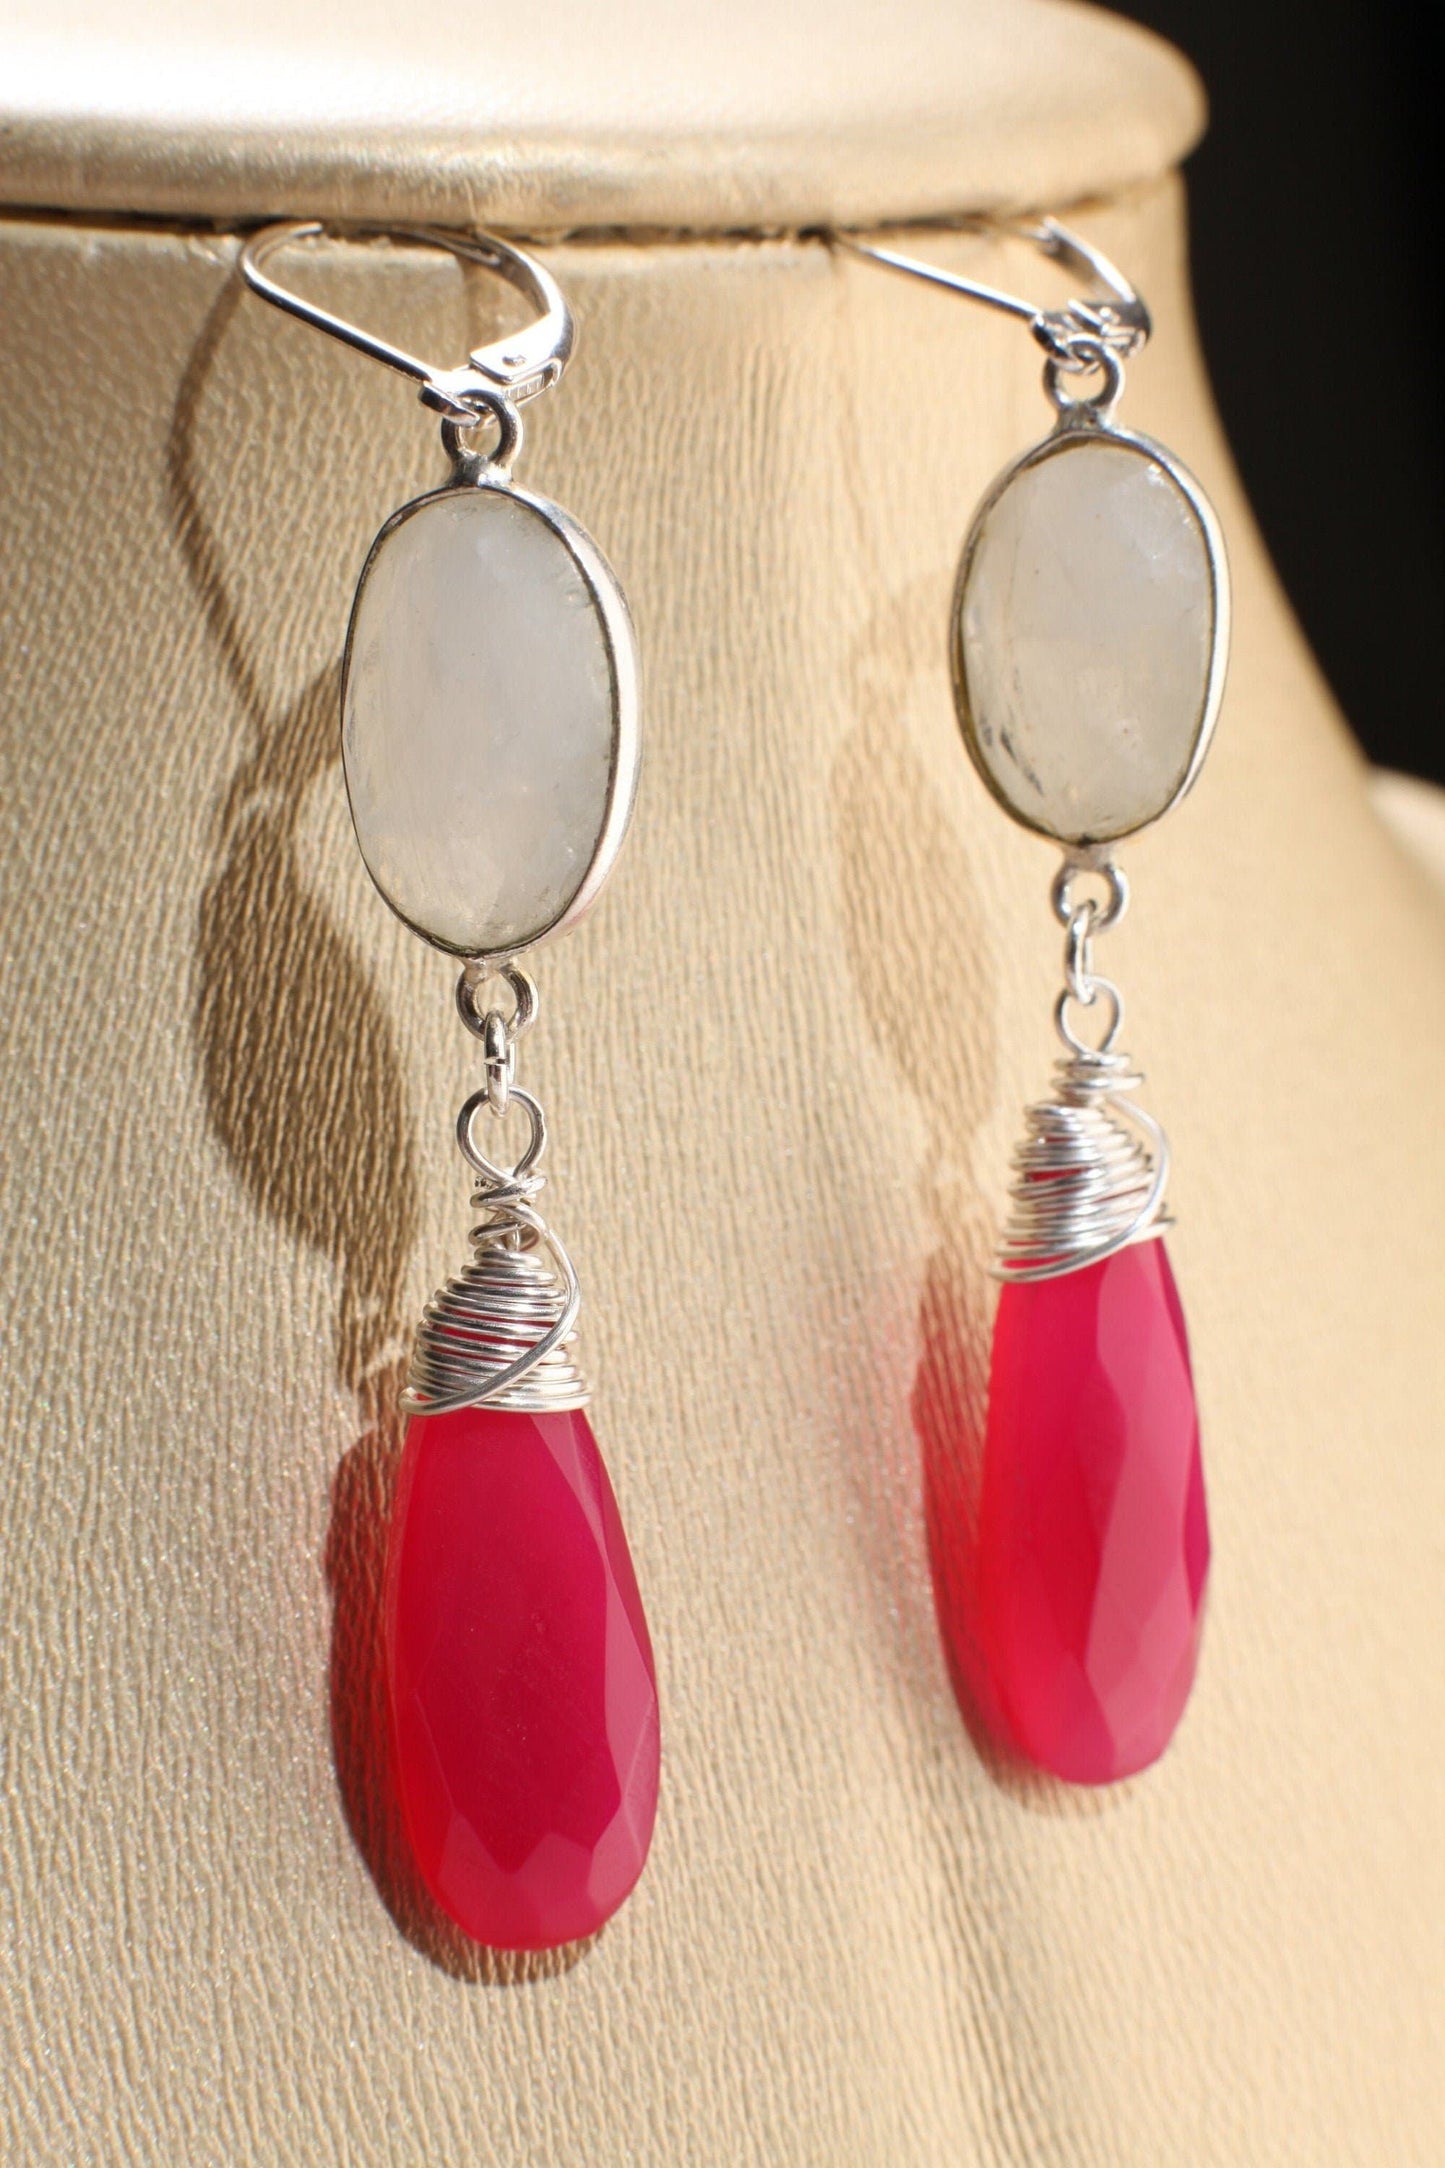 Moonstone in Sterling Silver Bezel with Dangle Hot Pink Chalcedony 9.5x25mm Wire Wrapped Briolette Teardrop in 925 Sterling Silver Leverback